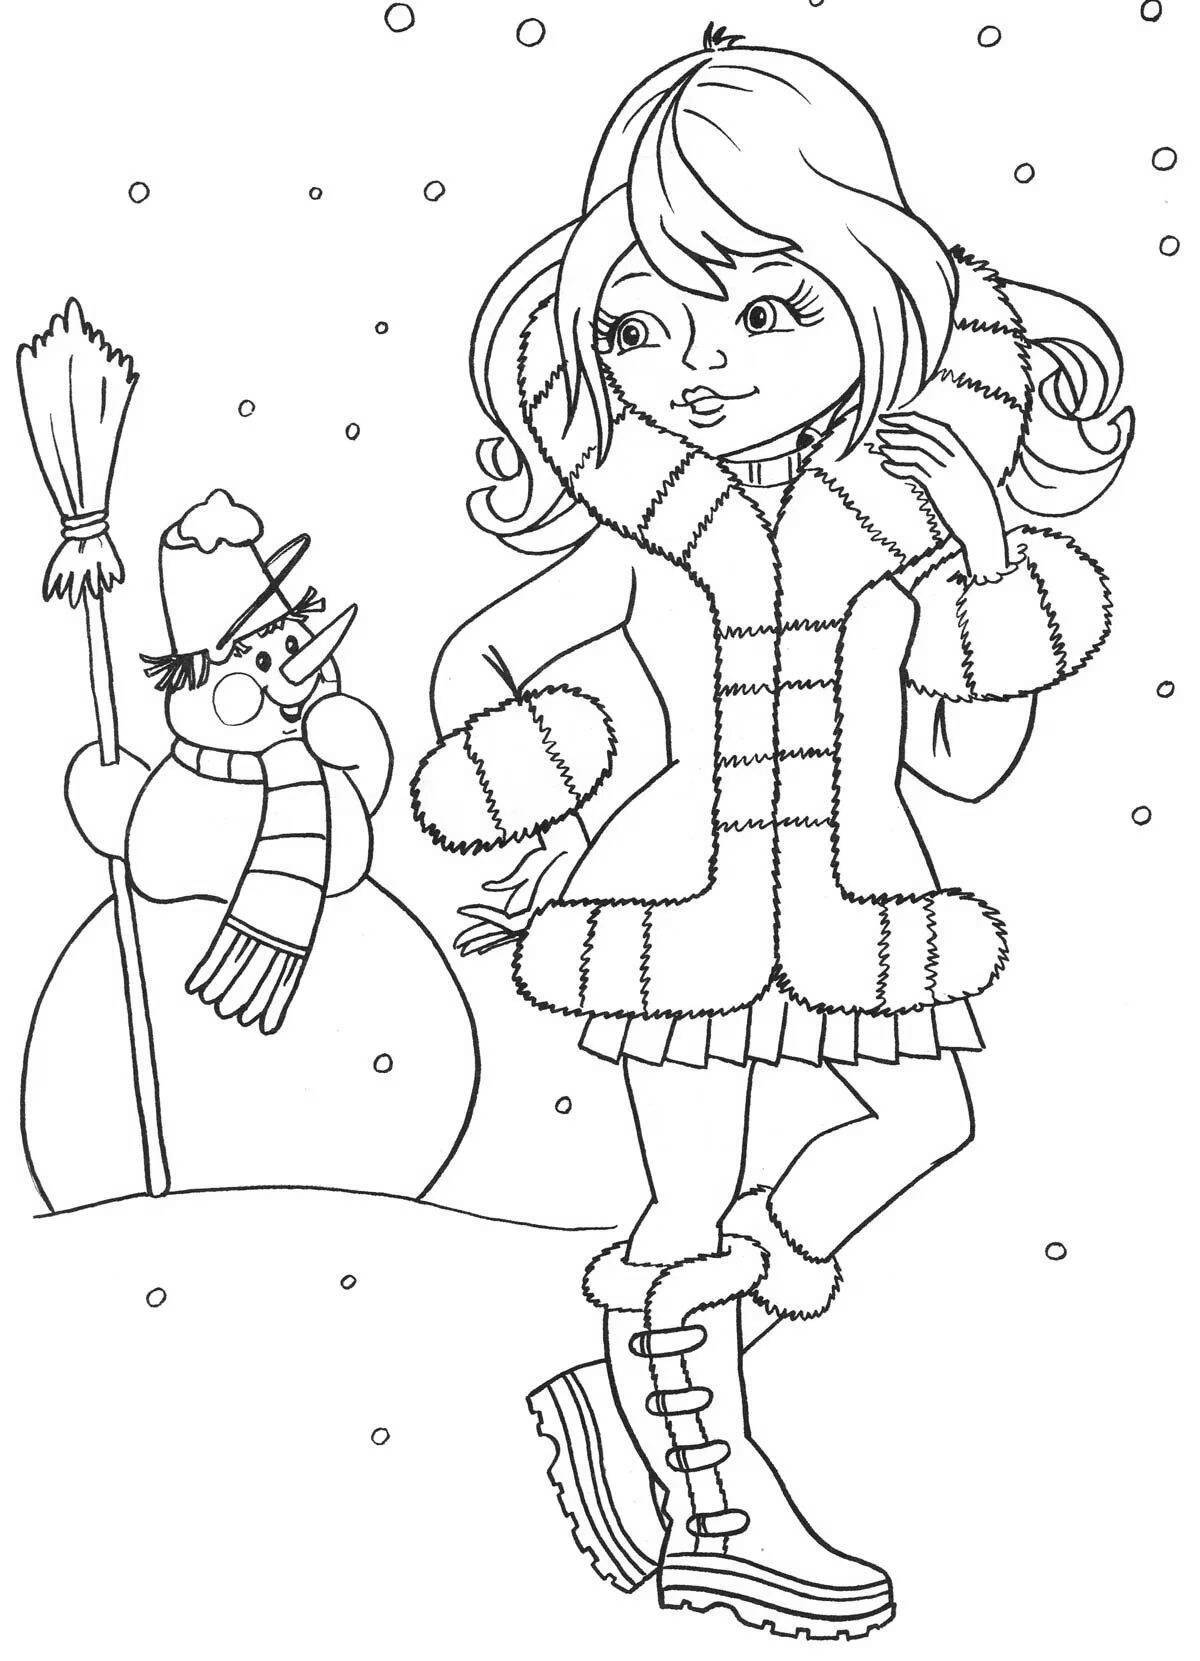 Adorable winter clothes coloring book for 6-7 year olds